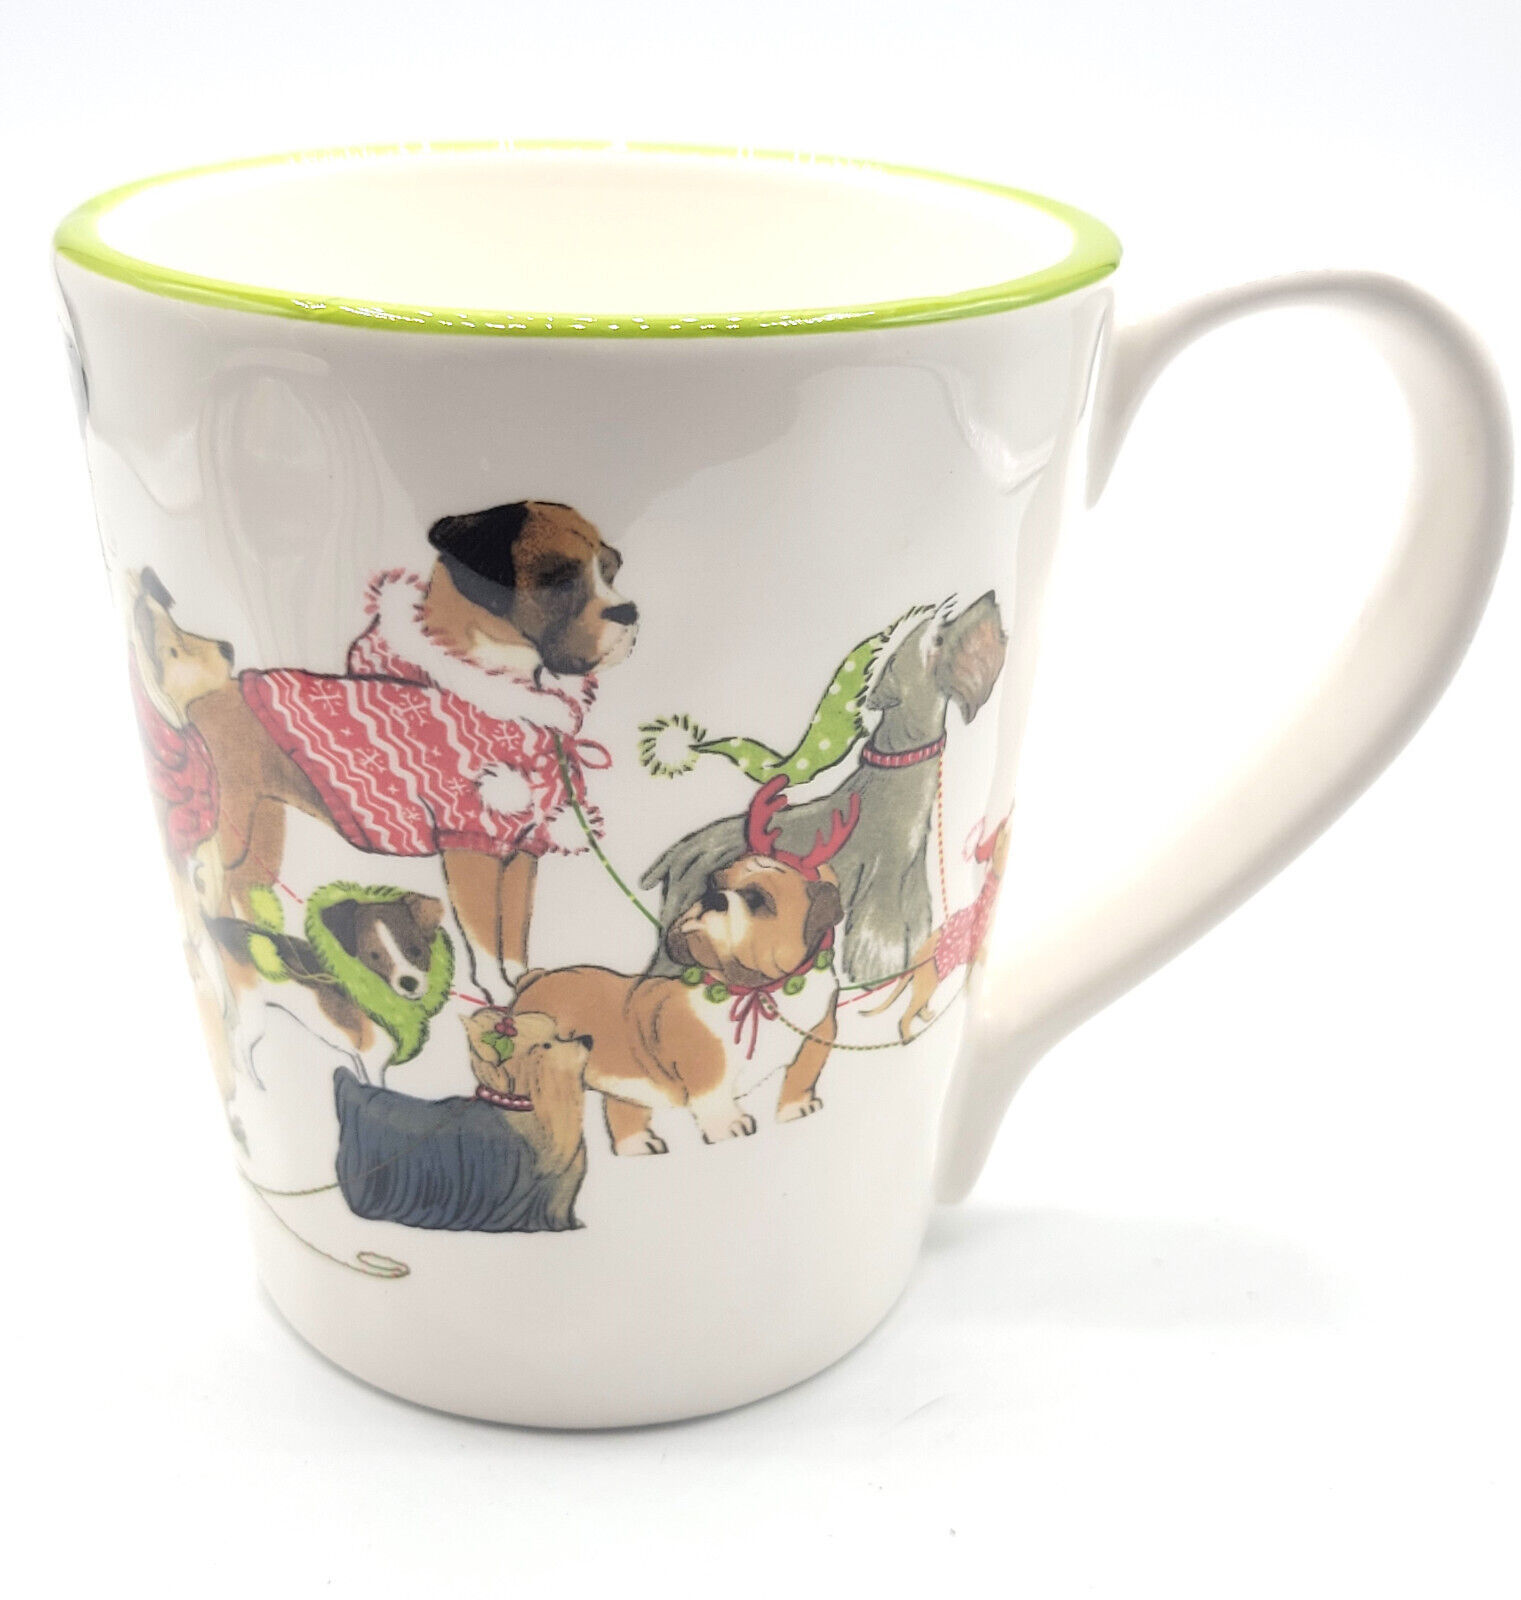 Primary image for Park Ave Puppy Dog Breeds Winter Holiday Mug Pier 1 Imports 4.5"tall White Green